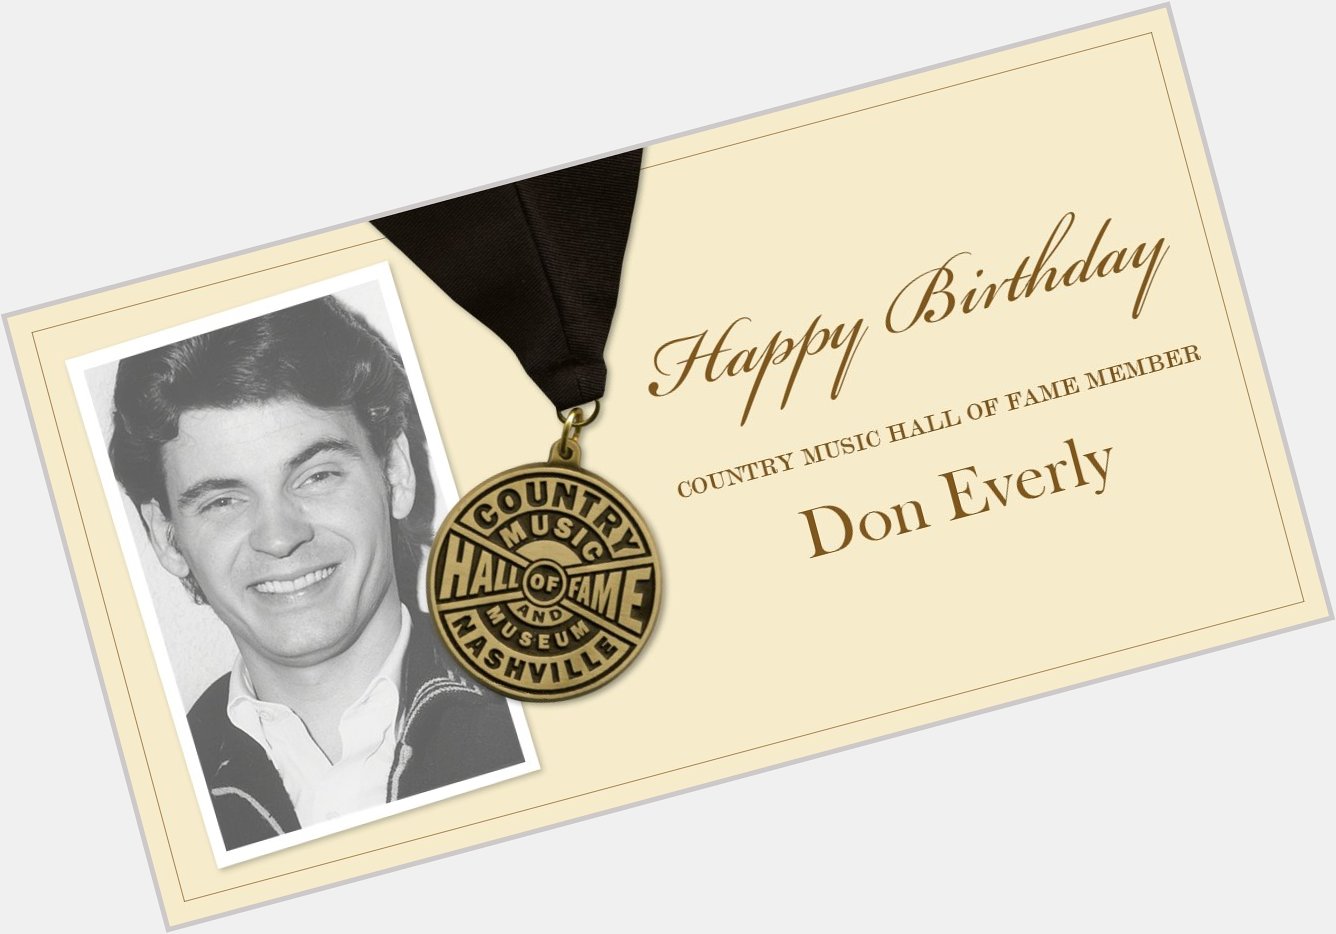 Join us in wishing Country Music Hall of Fame Member Don Everly, of The Everly Brothers, a very happy birthday! 